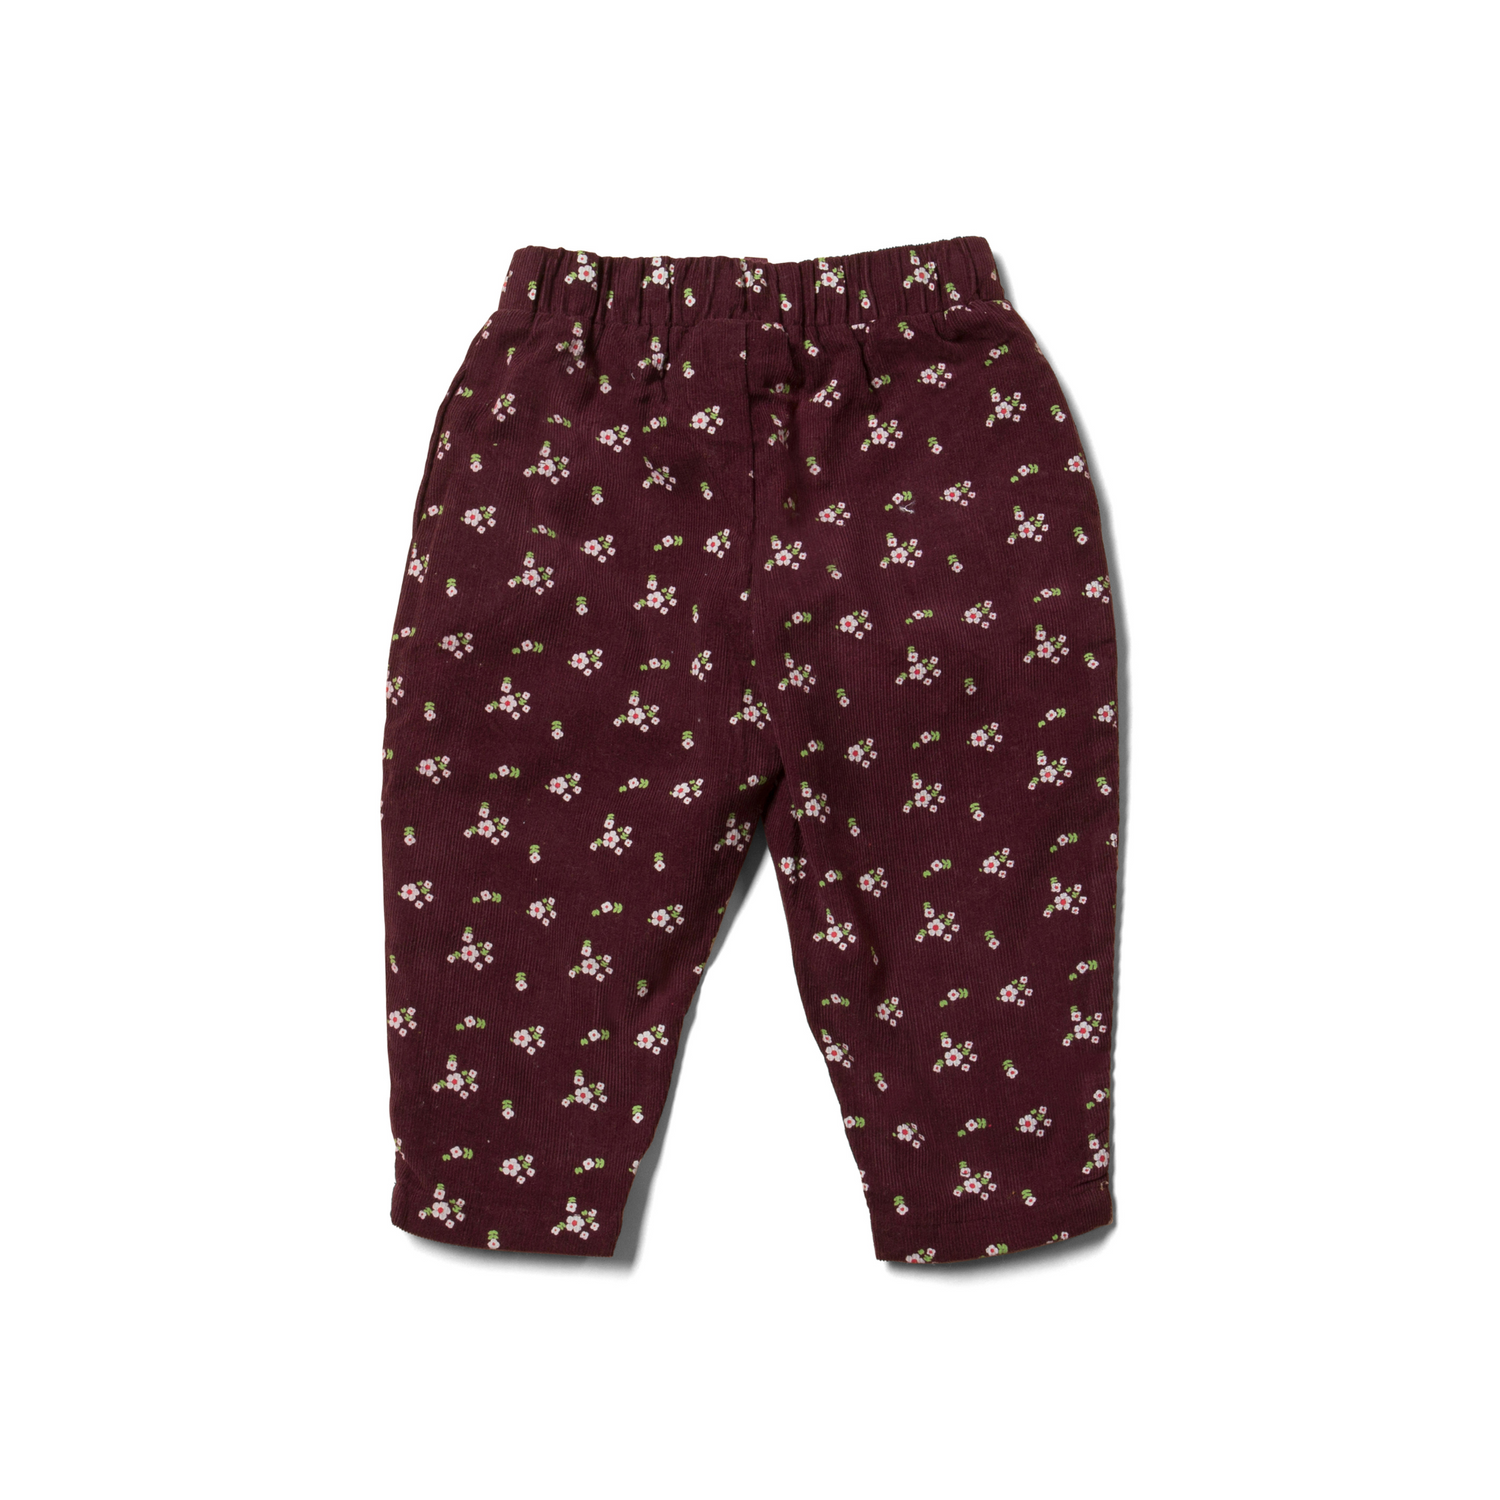 Plum flowers cord comfy trousers back